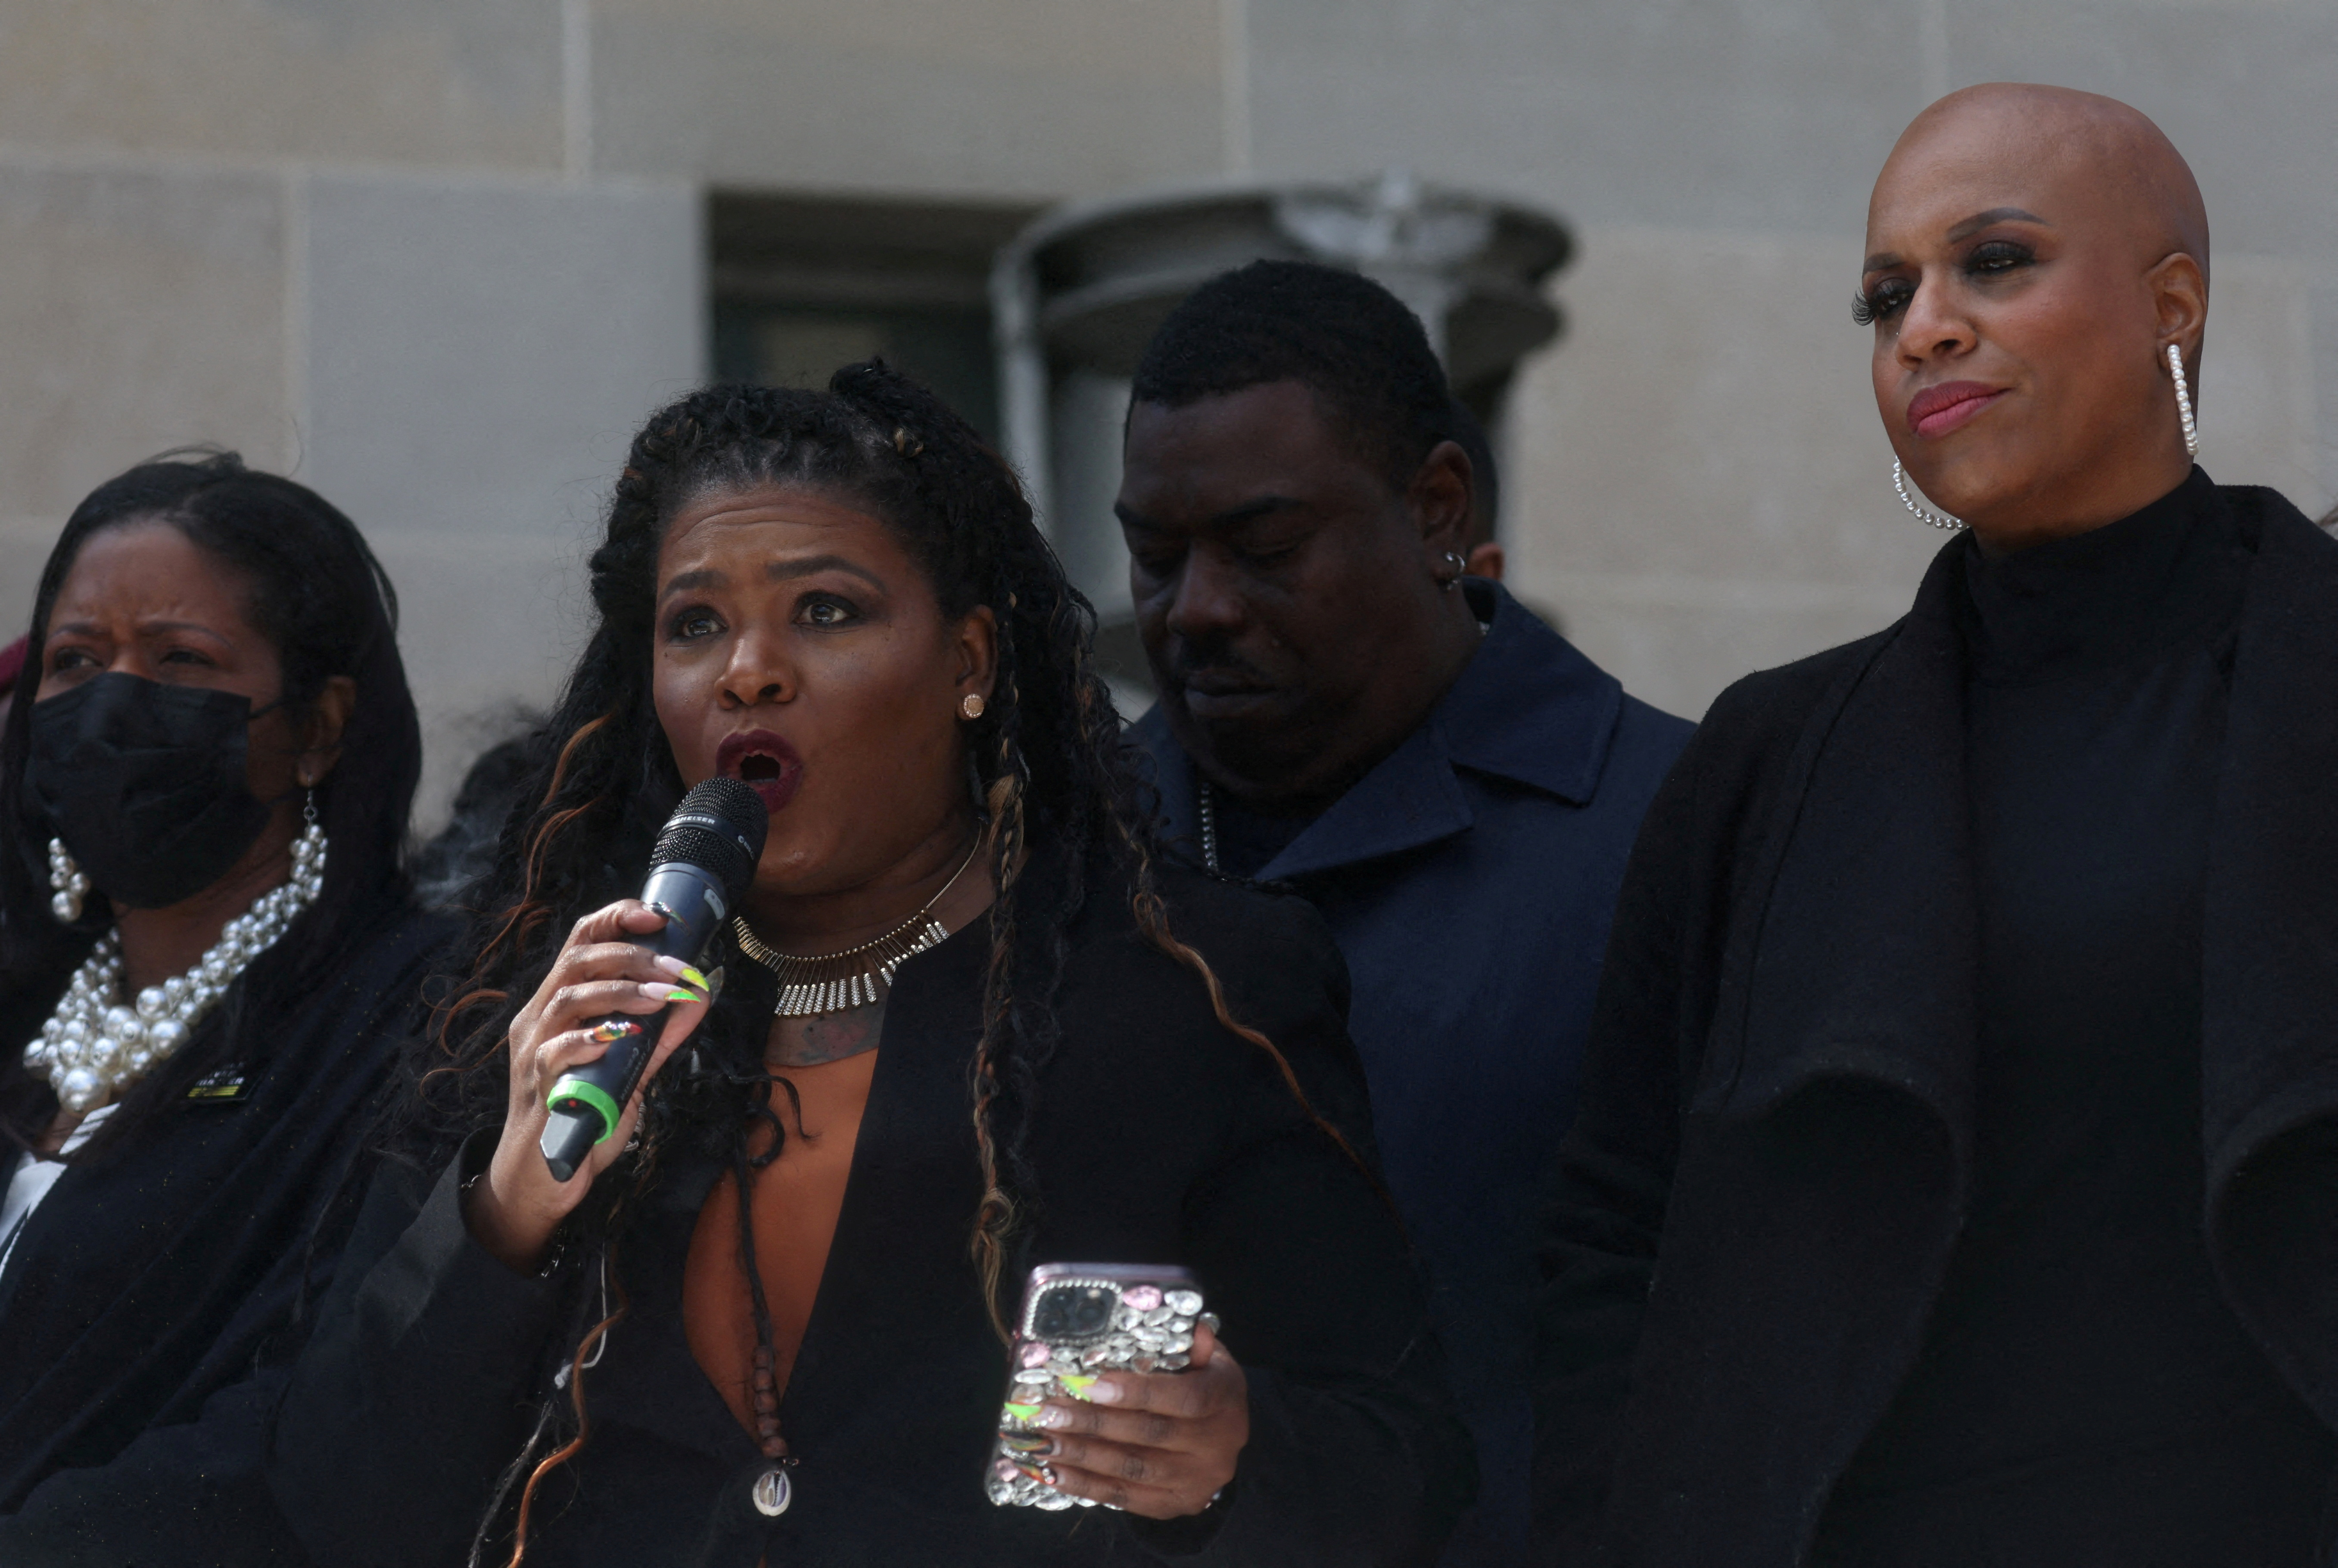 U.S. Rep. Cori Bush (D-MO) rallies with U.S. Rep. Ayanna Pressley (D-MA) outside of the U.S. Department of Justice to call for an end to qualified immunity in Washington, U.S., March 3, 2022. REUTERS/Leah Millis